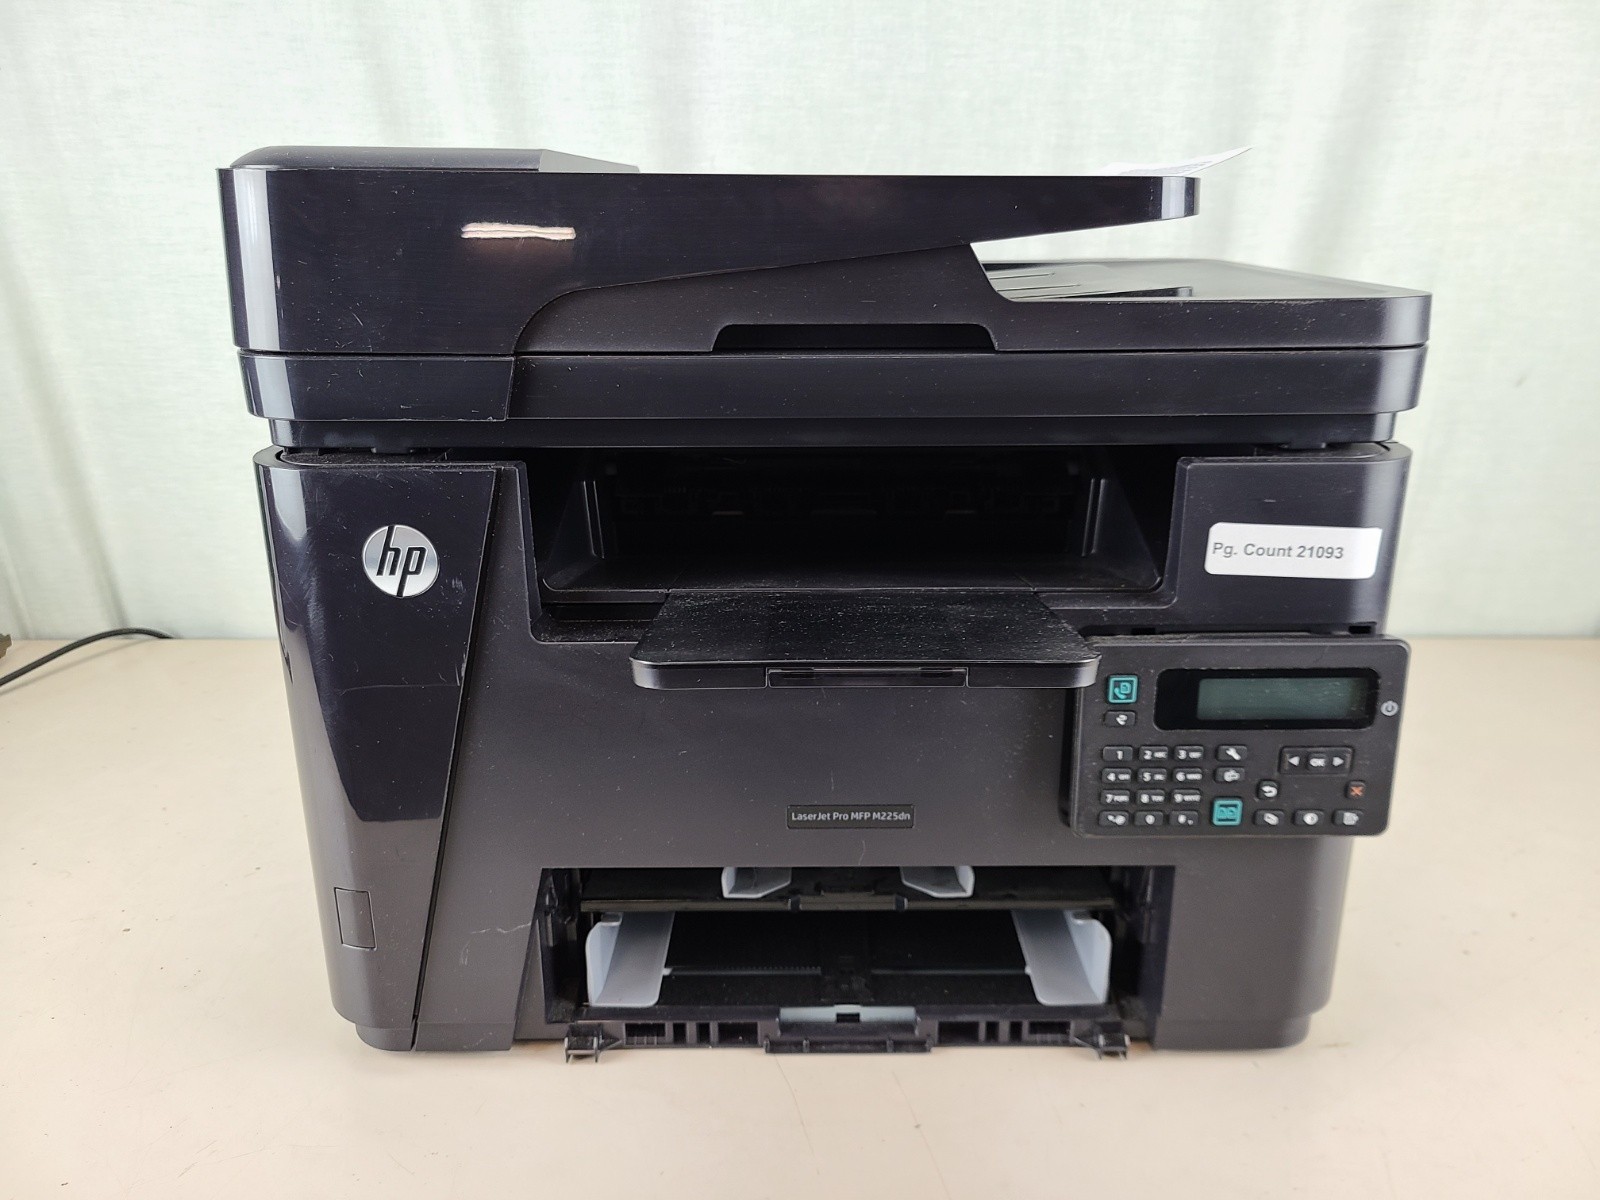 HP Laserjet Pro MFP M225dn Printer AS-IS 21093 Pages